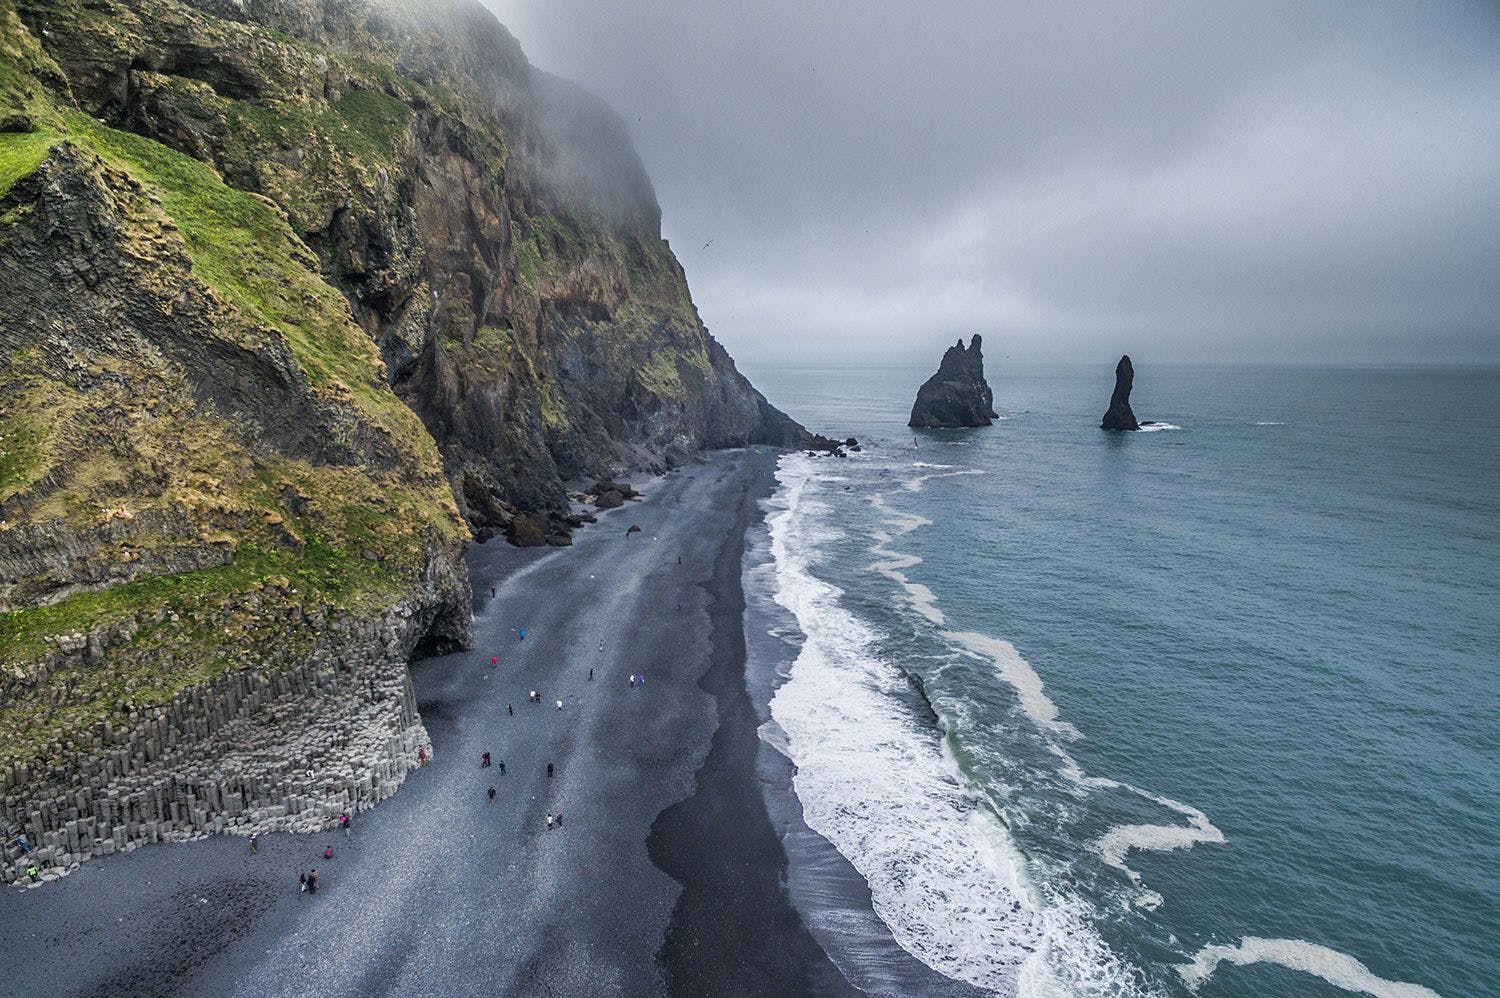 Arial shot of the black sand beach in Iceland